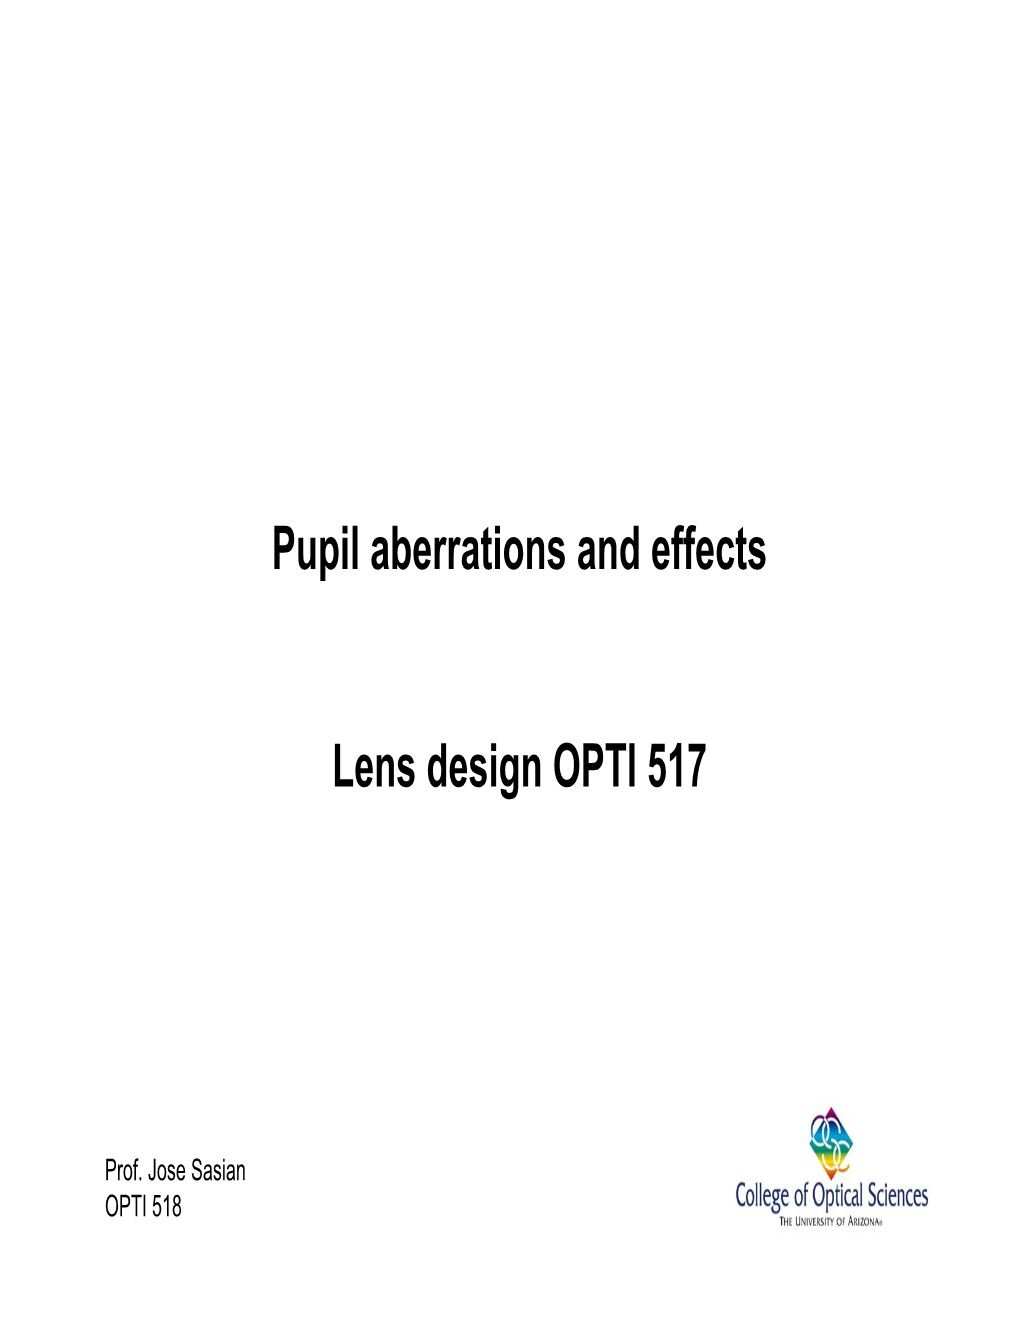 Pupil Aberrations and Effects Lens Design OPTI